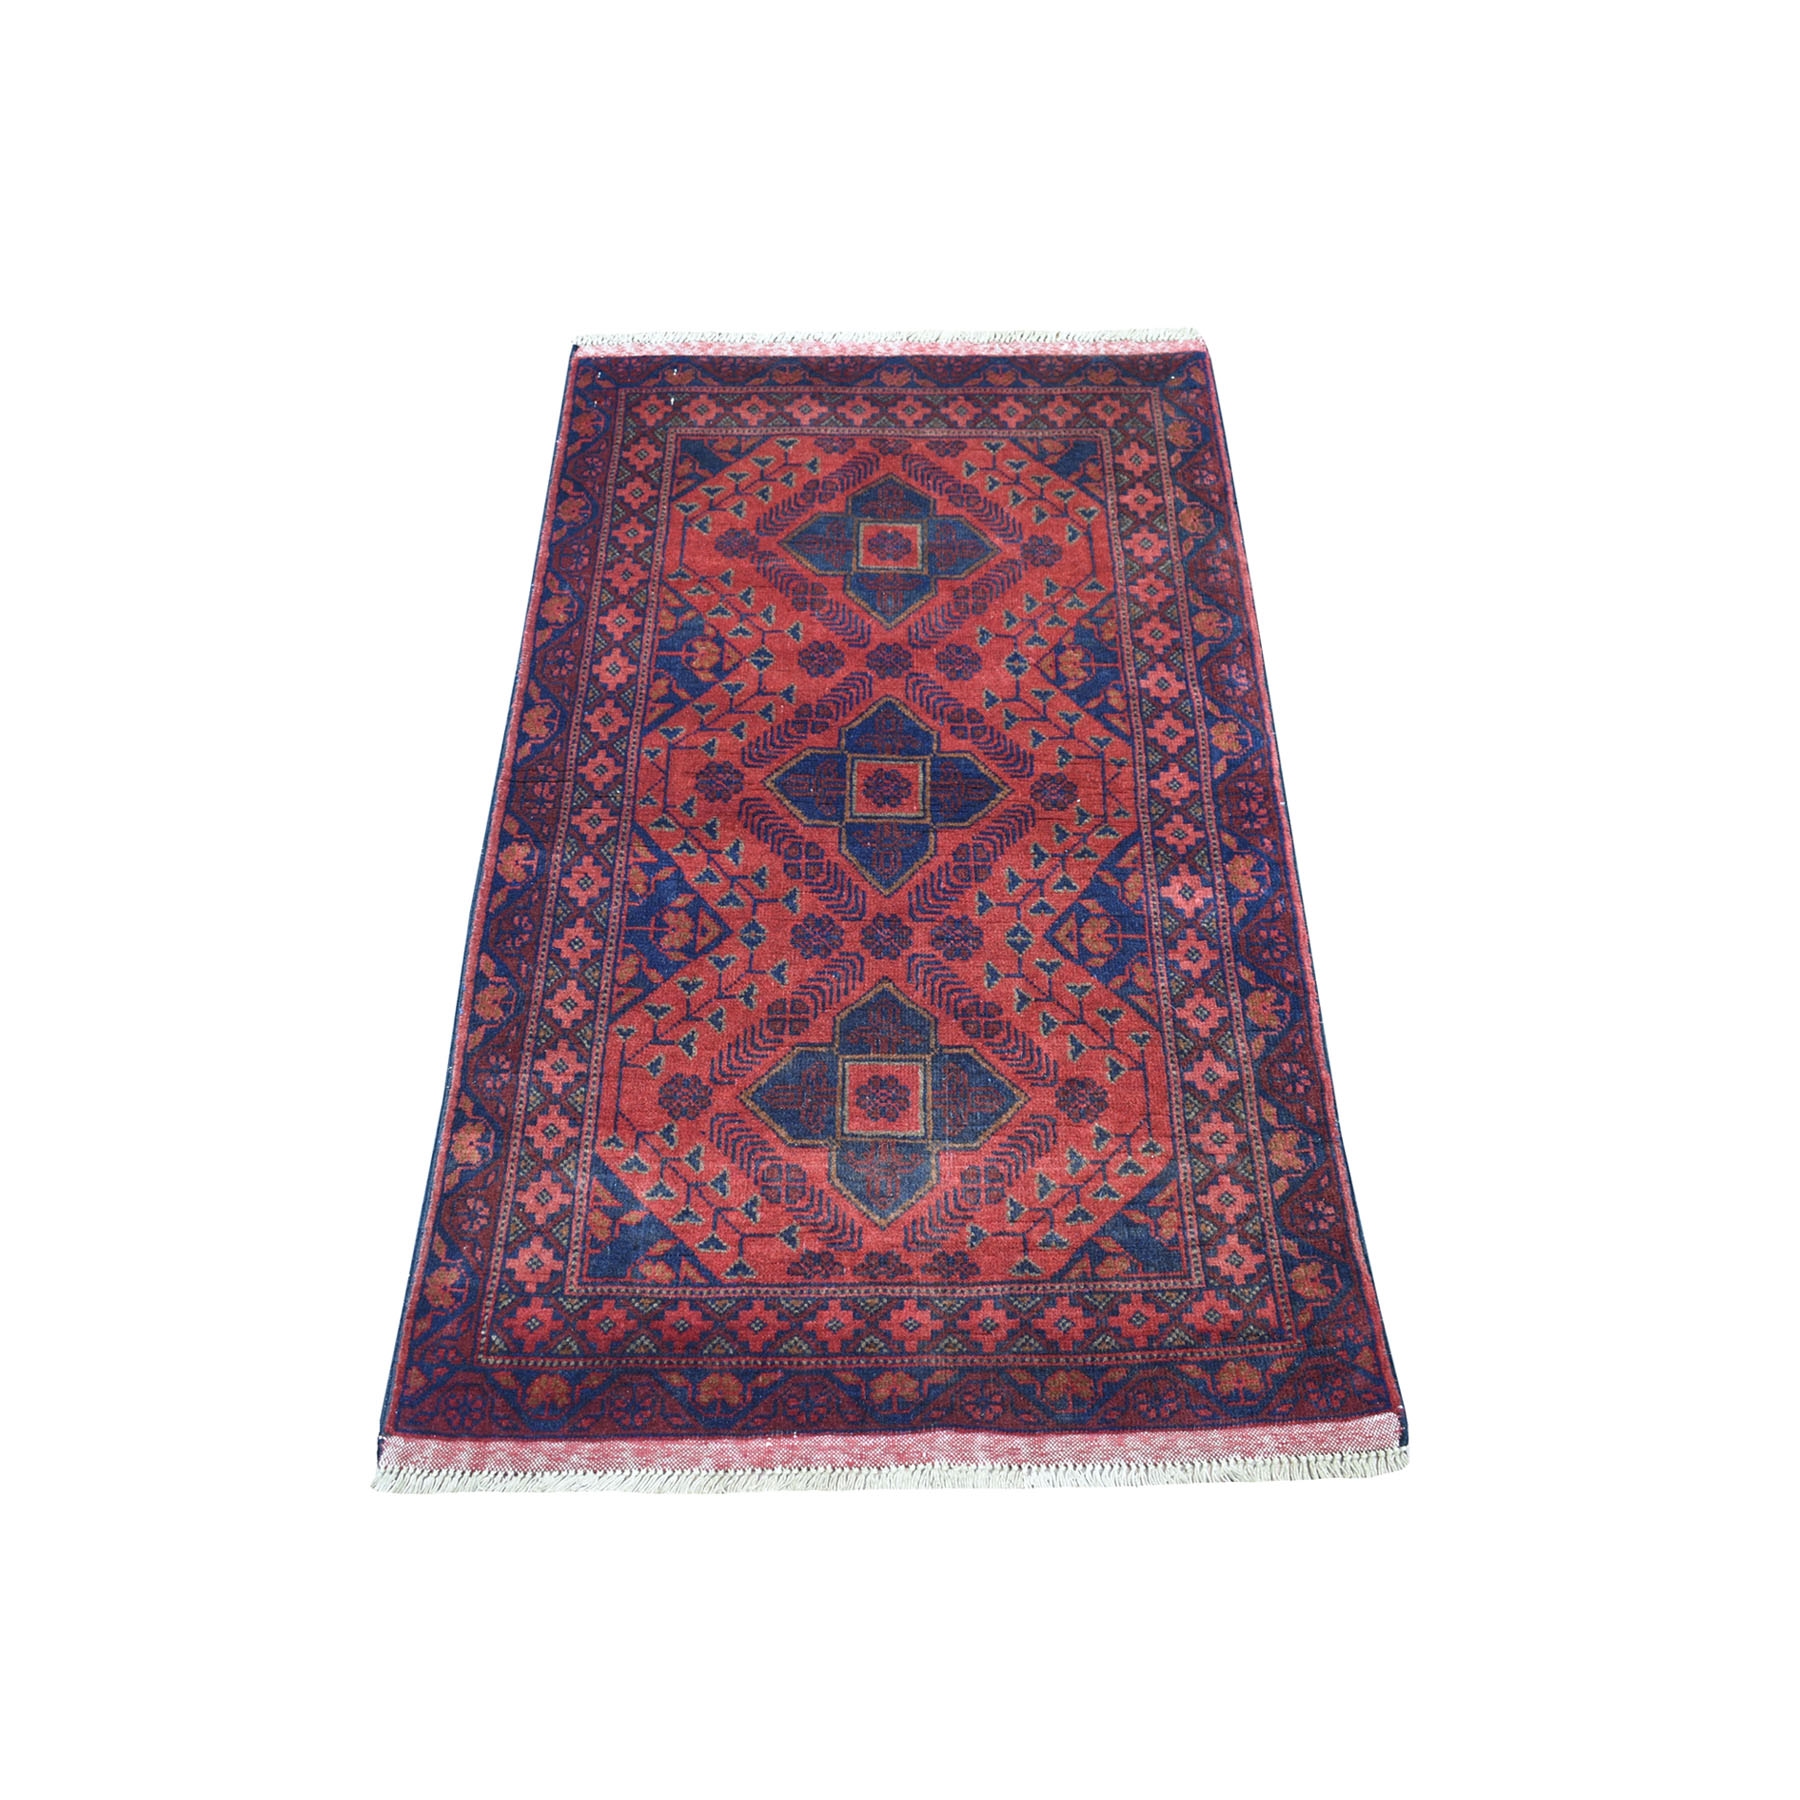 2'5"X4'2" Deep And Saturated Red Geometric Afghan Andkhoy Pure Wool Hand Knotted Oriental Rug moaec7bc